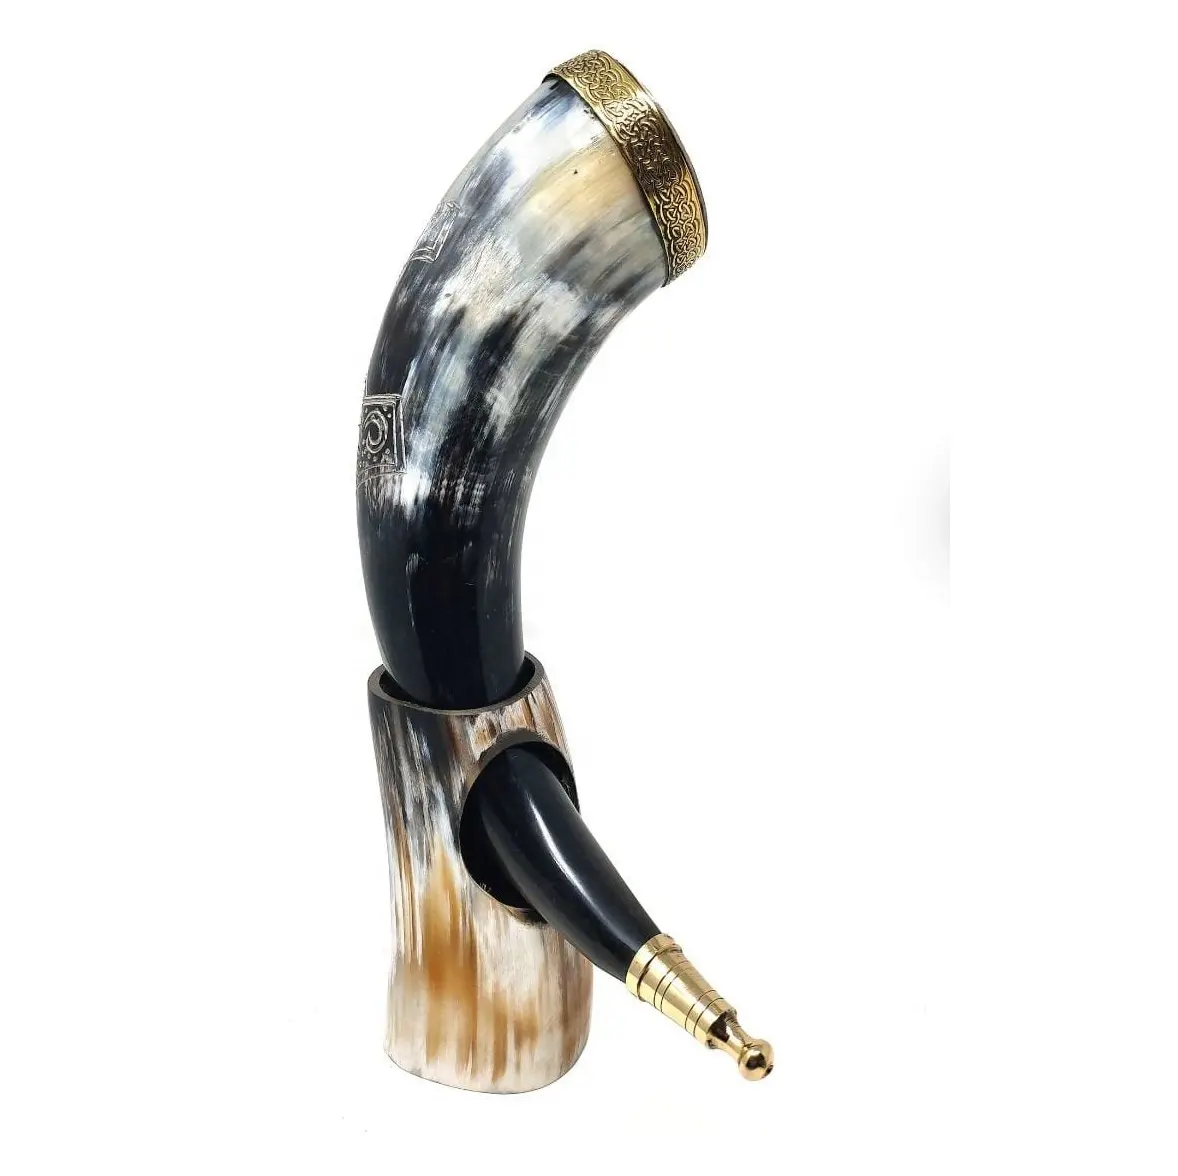 High Viking Drinking Horn High Purchasing Product High Quality Horn Buffalo Horn Hot Selling For Home Hotel And Restaurant